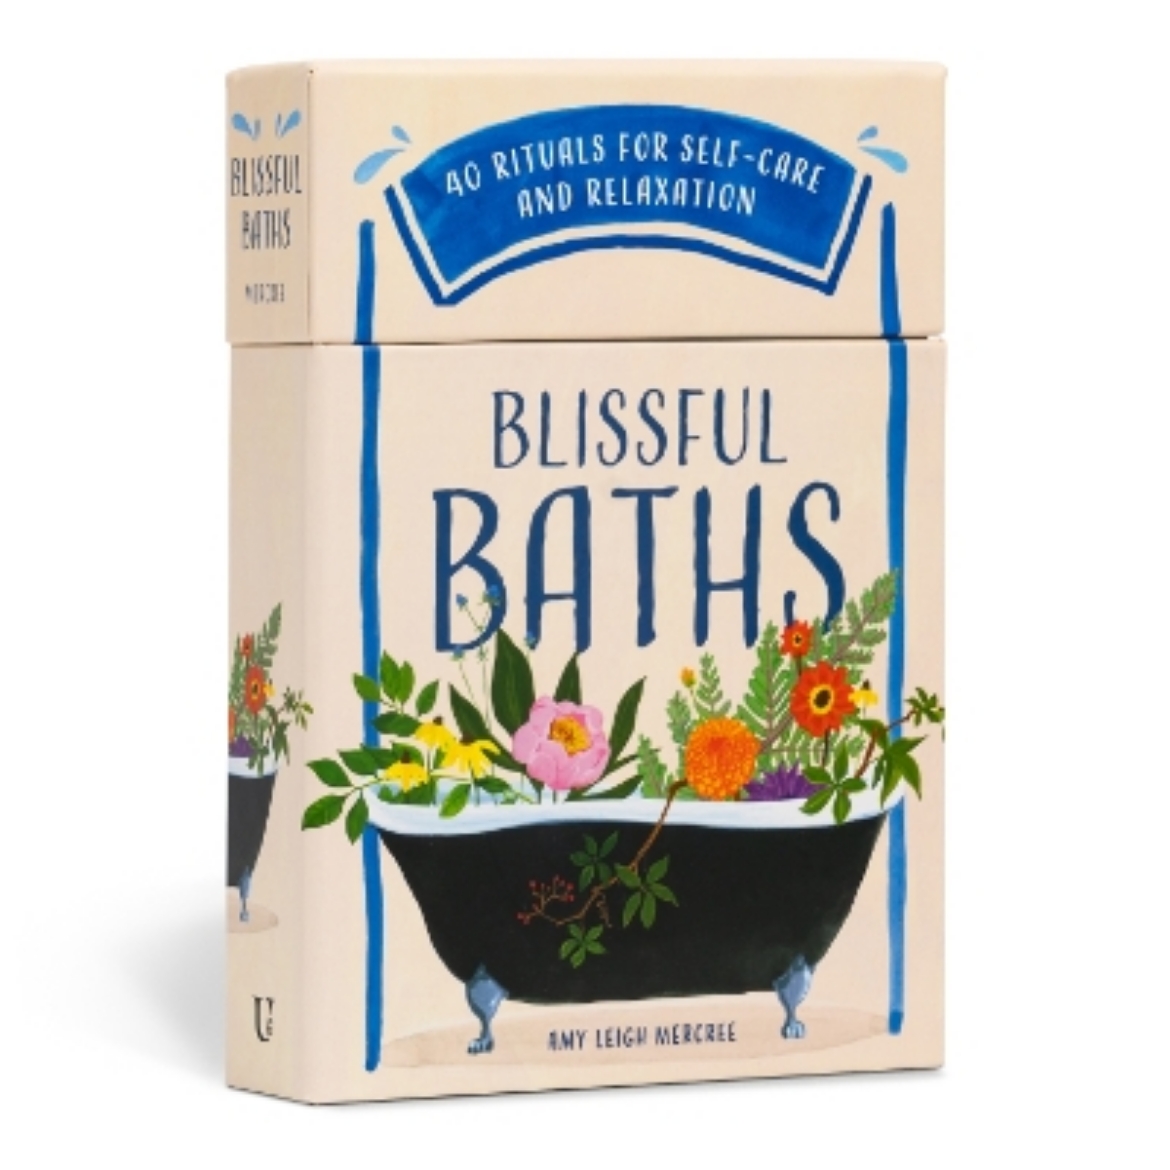 Picture of Blissful Baths: 40 Rituals for Self-Care and Relaxation